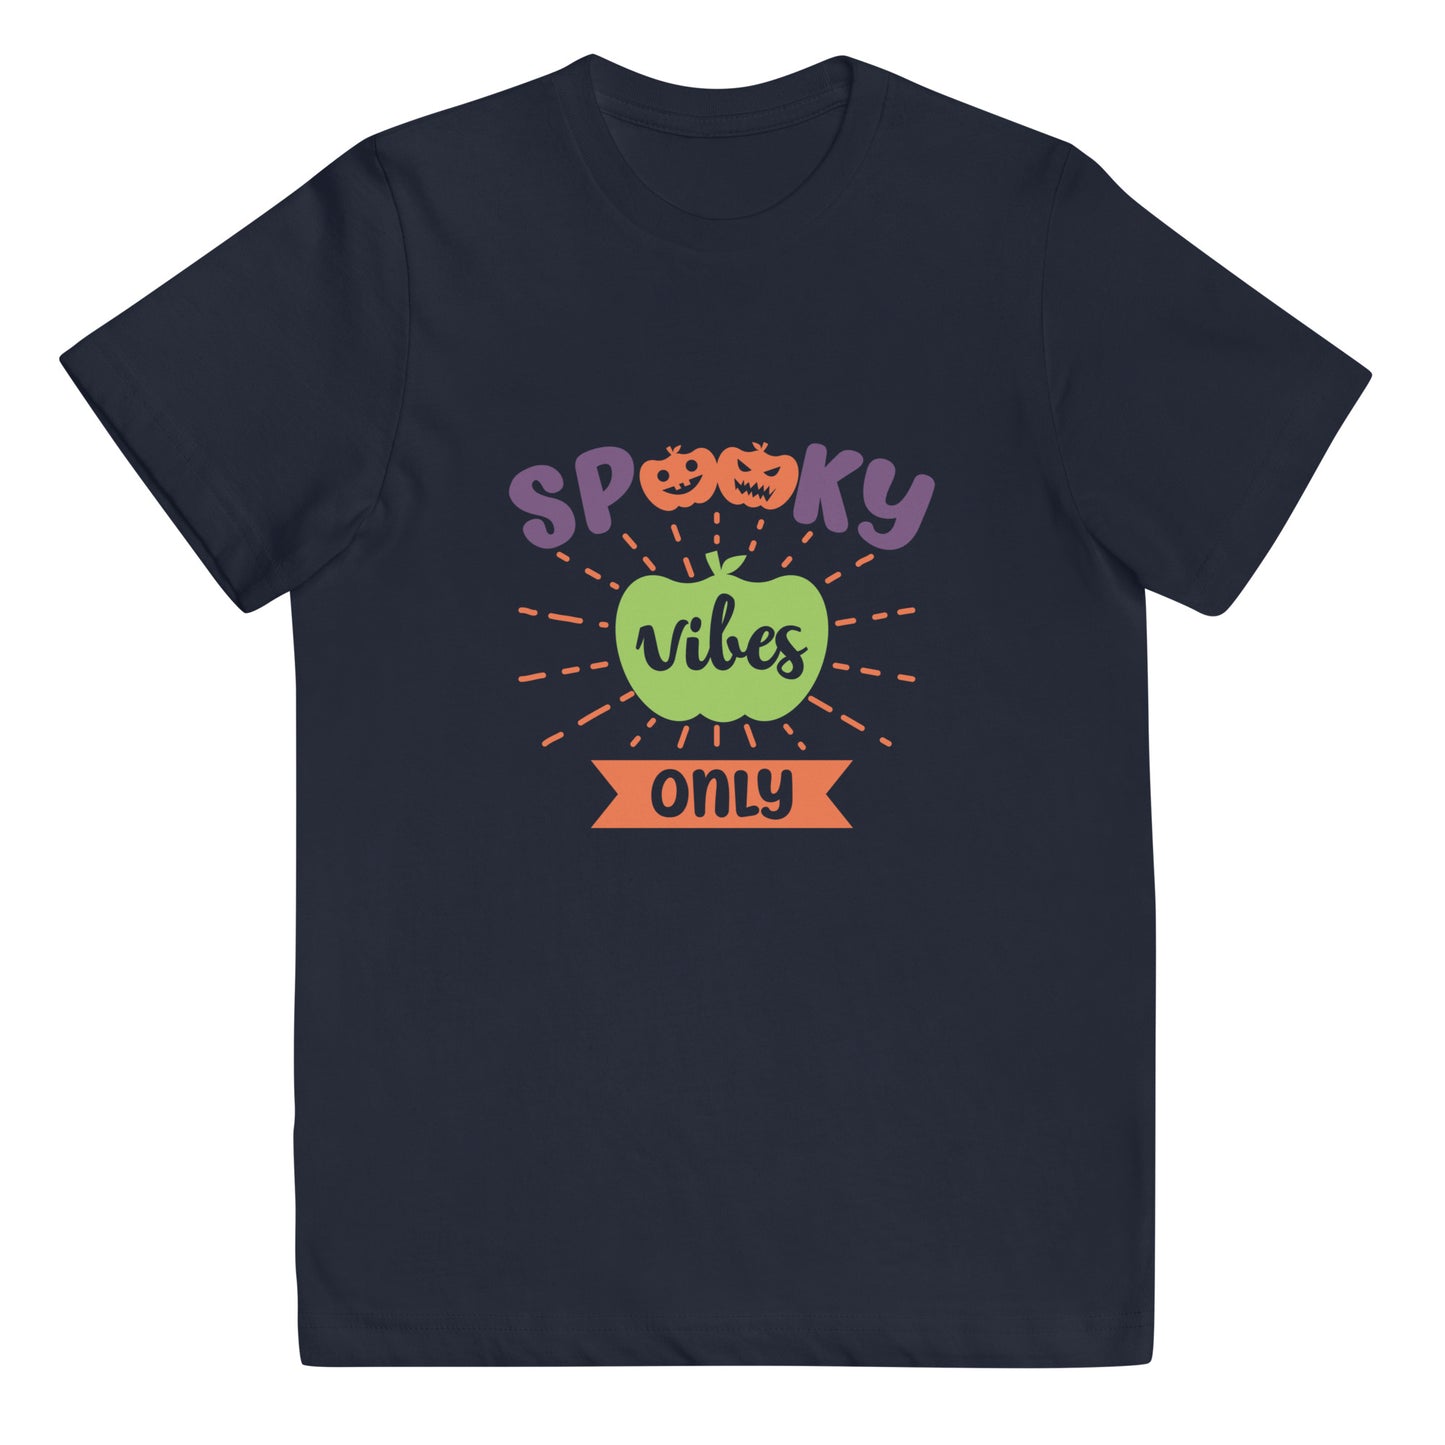 Spooky Vibes Only Youth jersey t-shirt